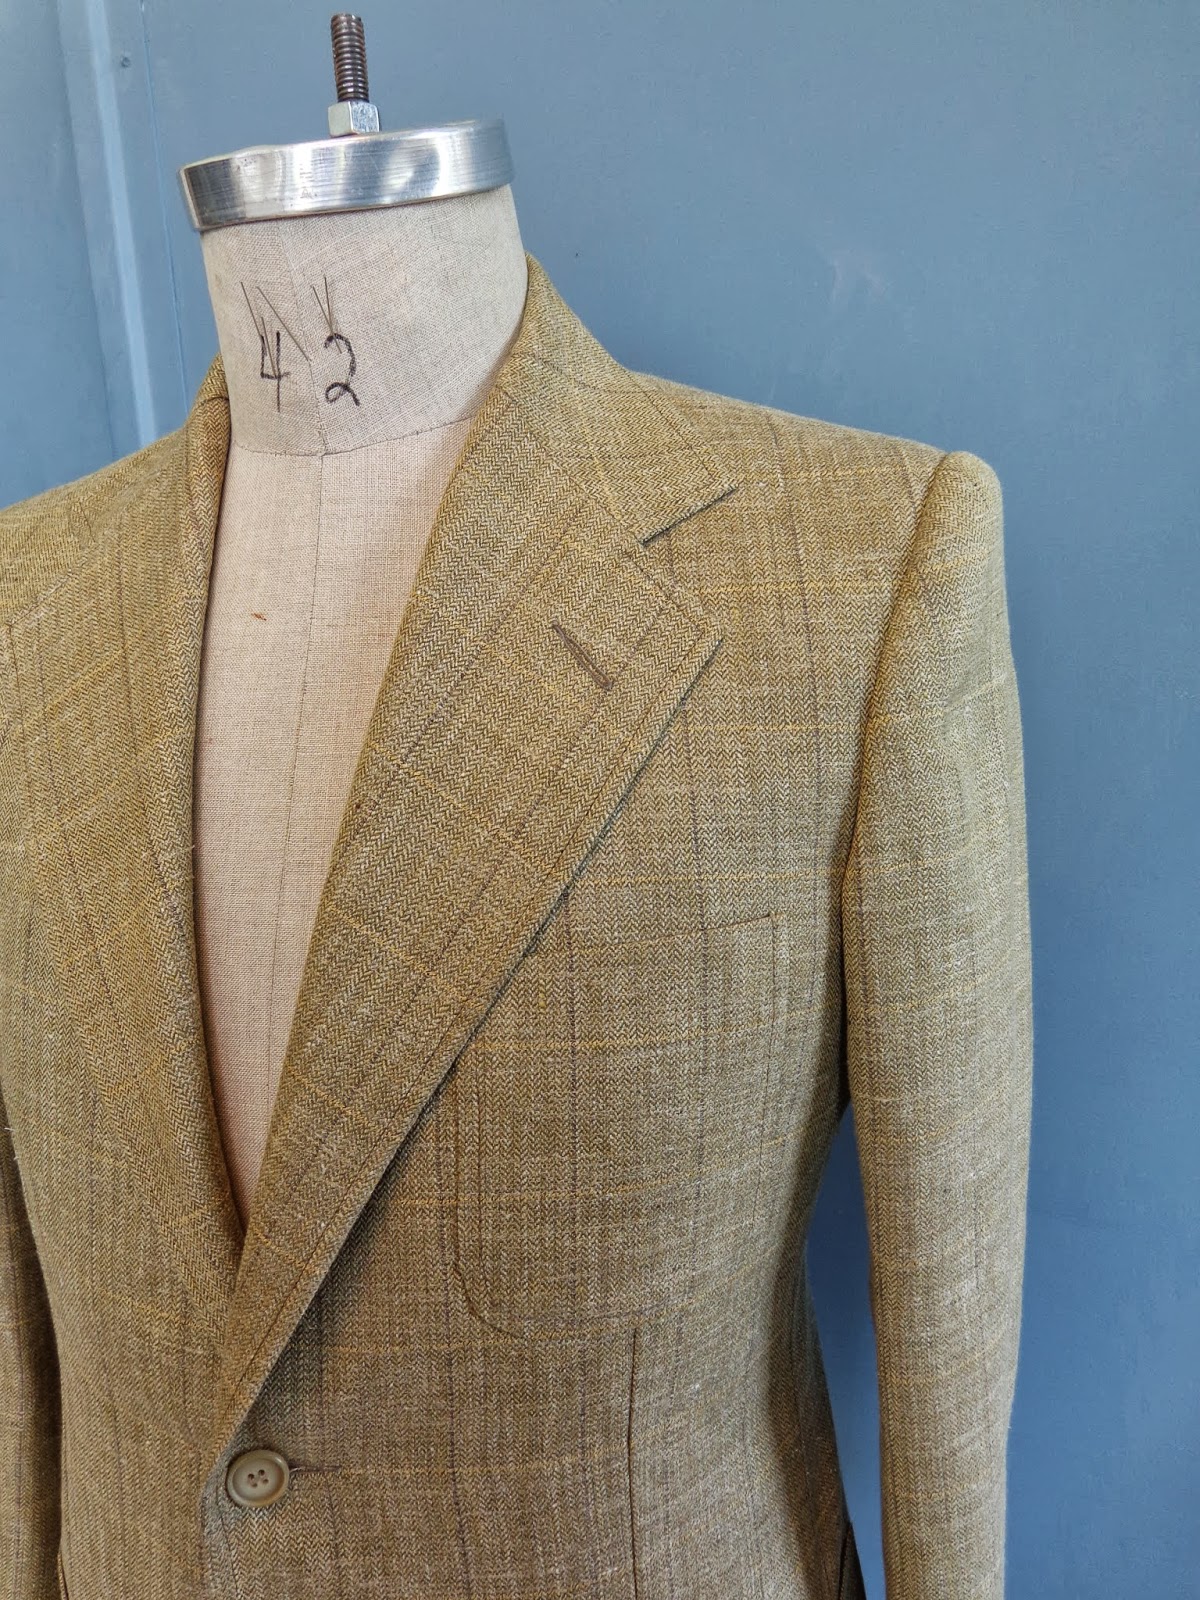 A Tailor Made It: Suits: the finishing details